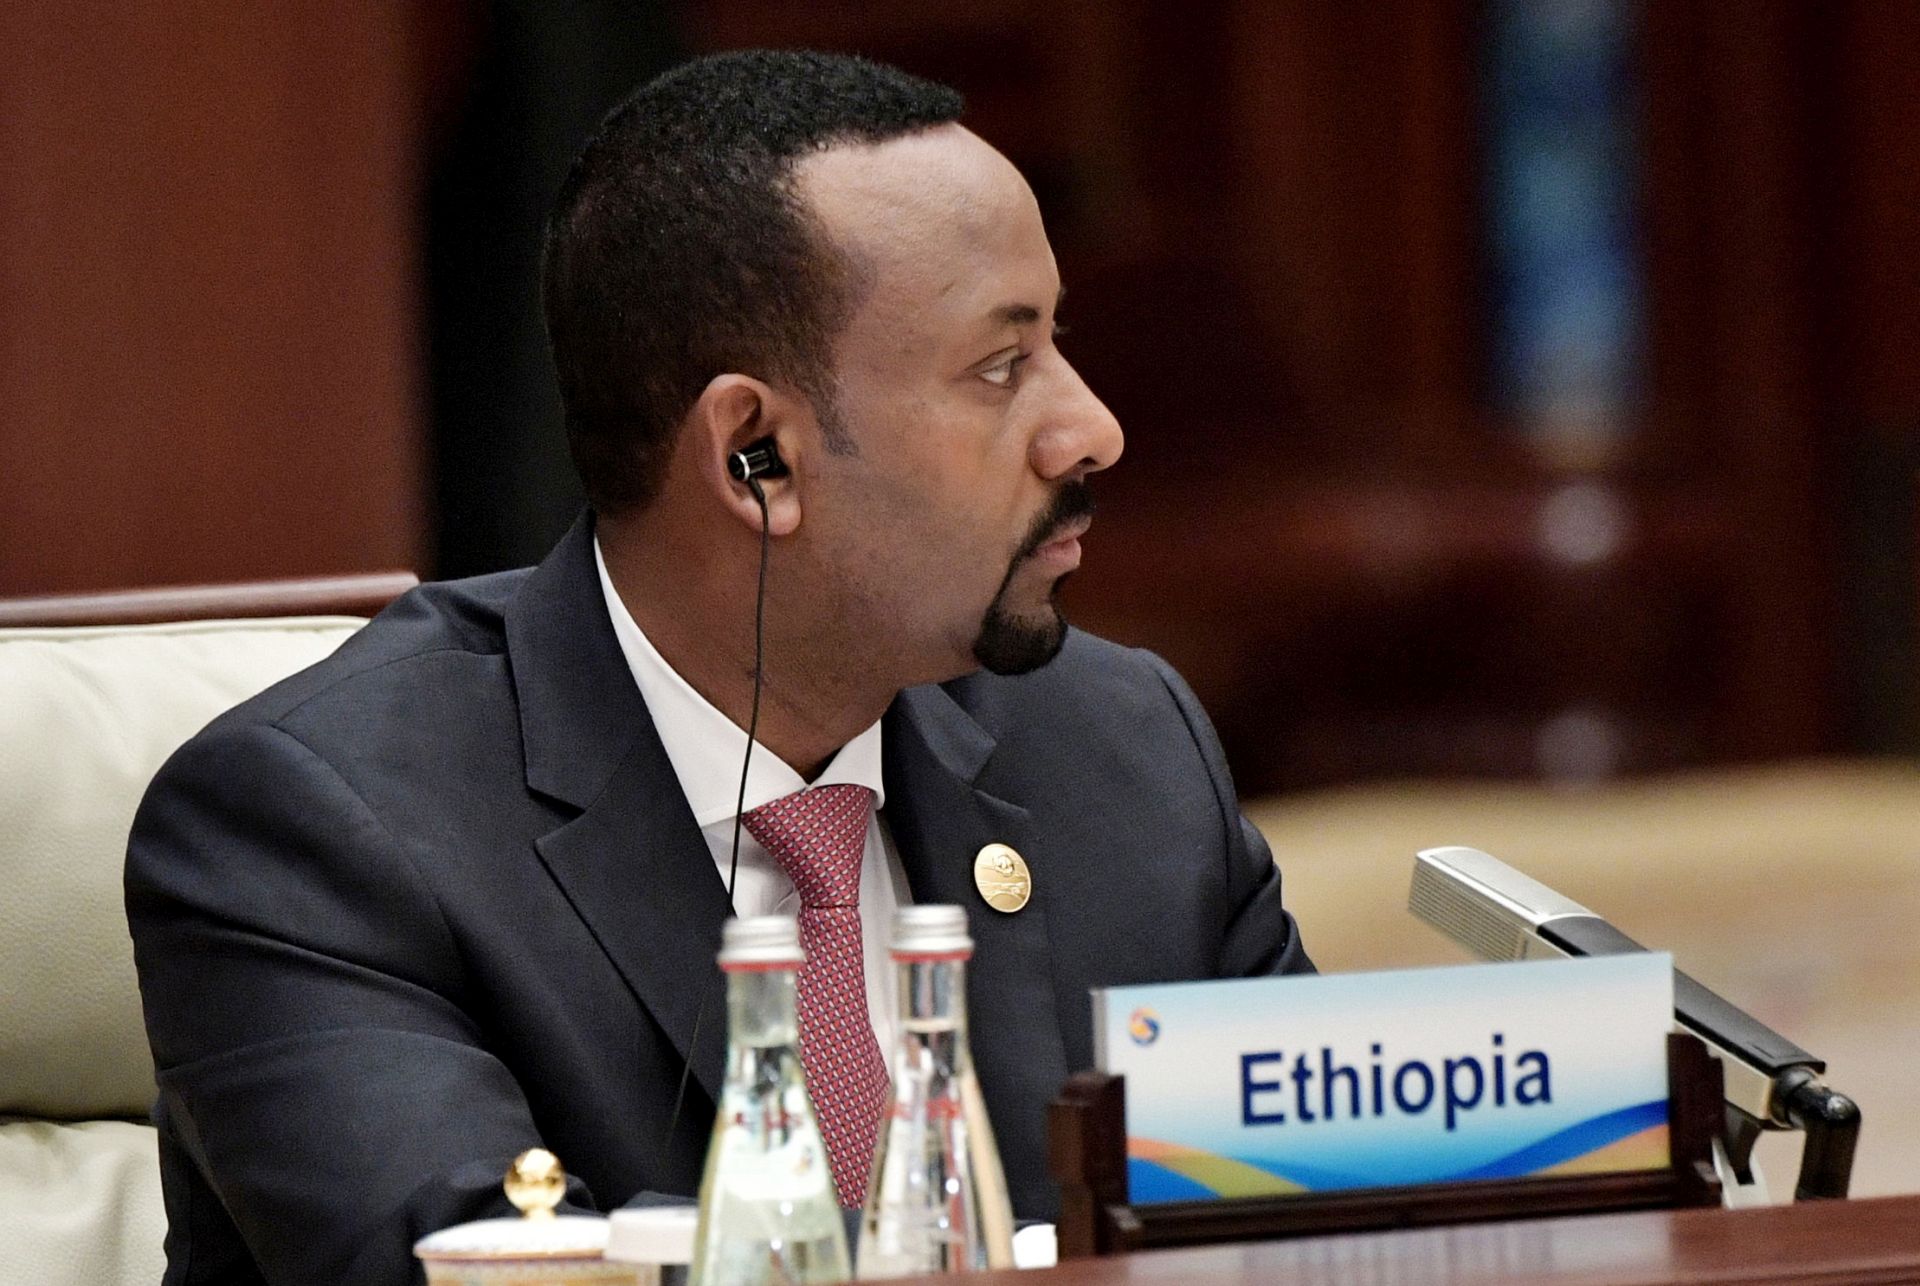 epa07667636 (FILE) Ethiopian Prime Minister Abiy Ahmed attends the Second Belt and Road Forum for International Cooperation (BRF) in Beijing, China, 27 April 2019 (Reissued 23 June 2019). Ethiopia’s Amhara state leader and his adviser were killed during a coup attempt in their state that was orchestrated by its top general, according to reports 23 June 2019.  EPA/ALEXEY NIKOLSKY / SPUTNIK / KREM / POOL MANDATORY CREDIT *** Local Caption *** 55151860